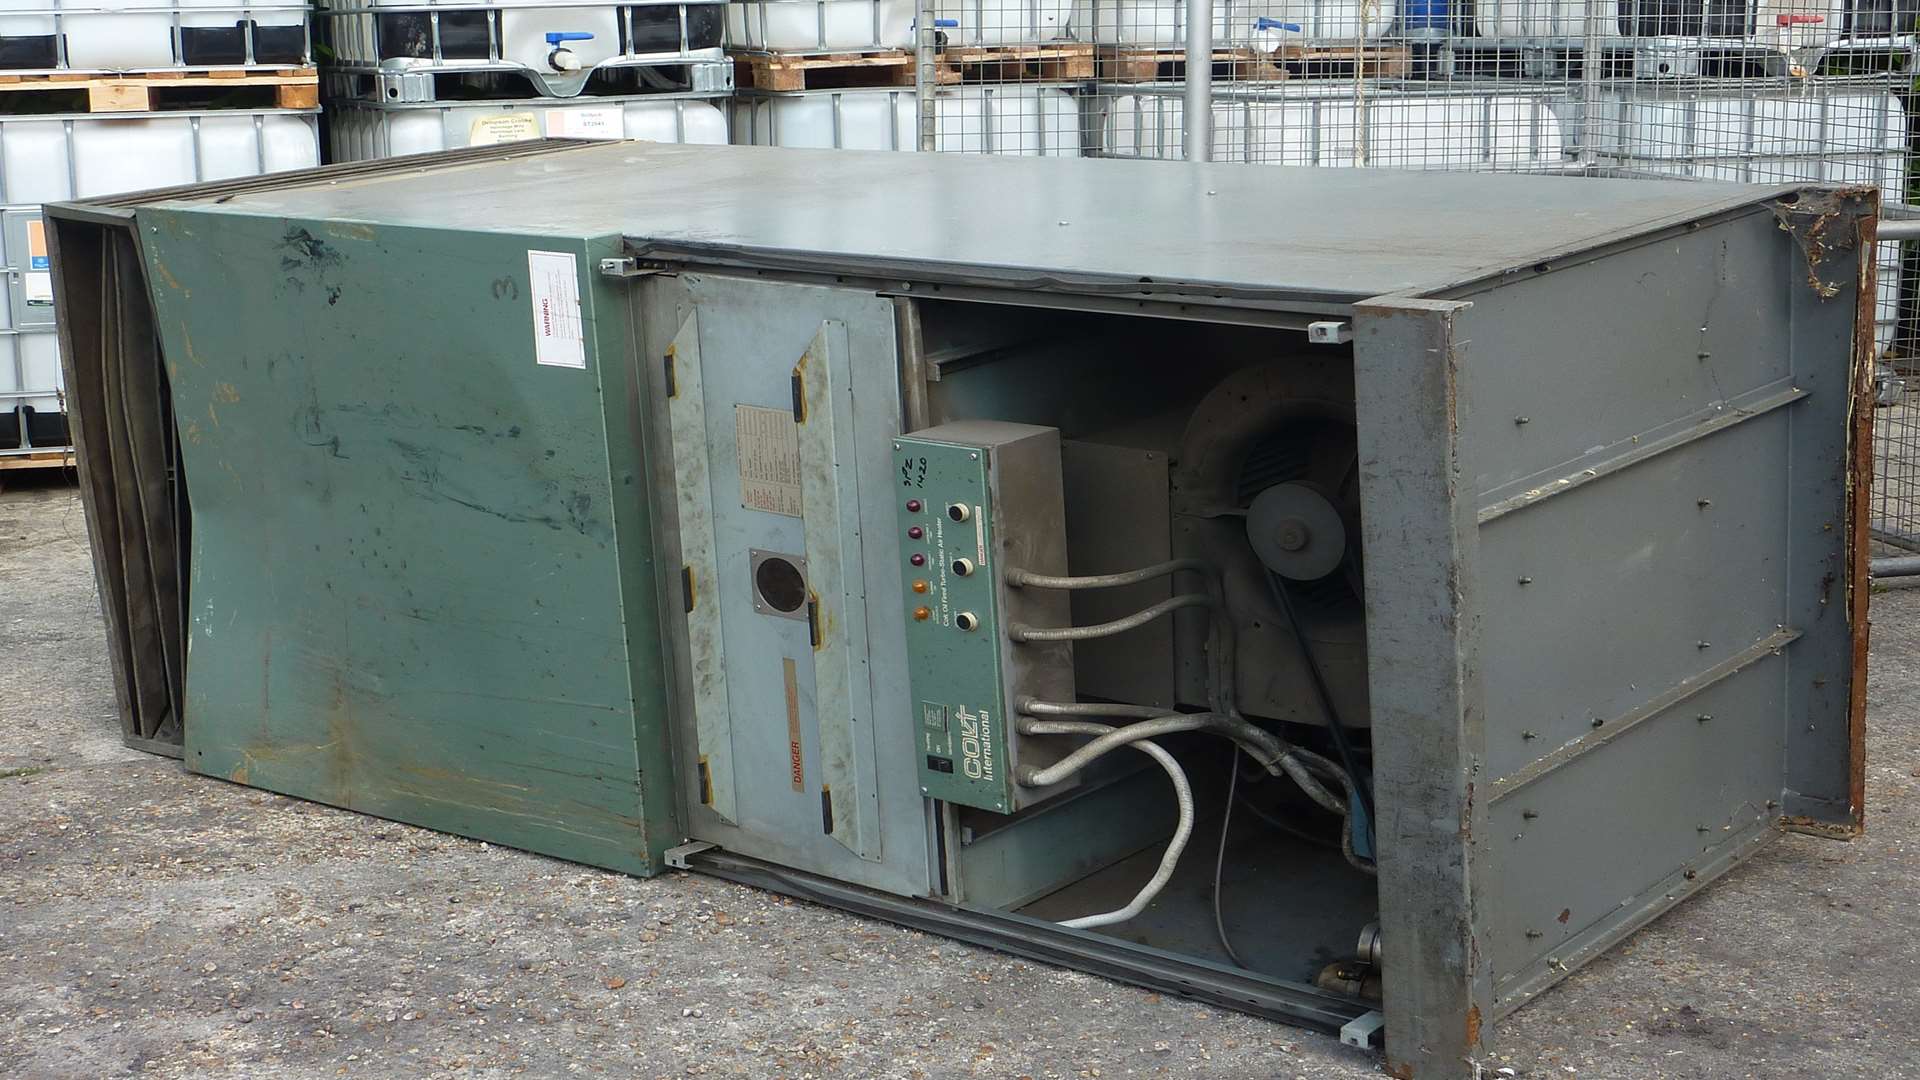 The heater unit that crushed an 18-year-old worker in Maidstone